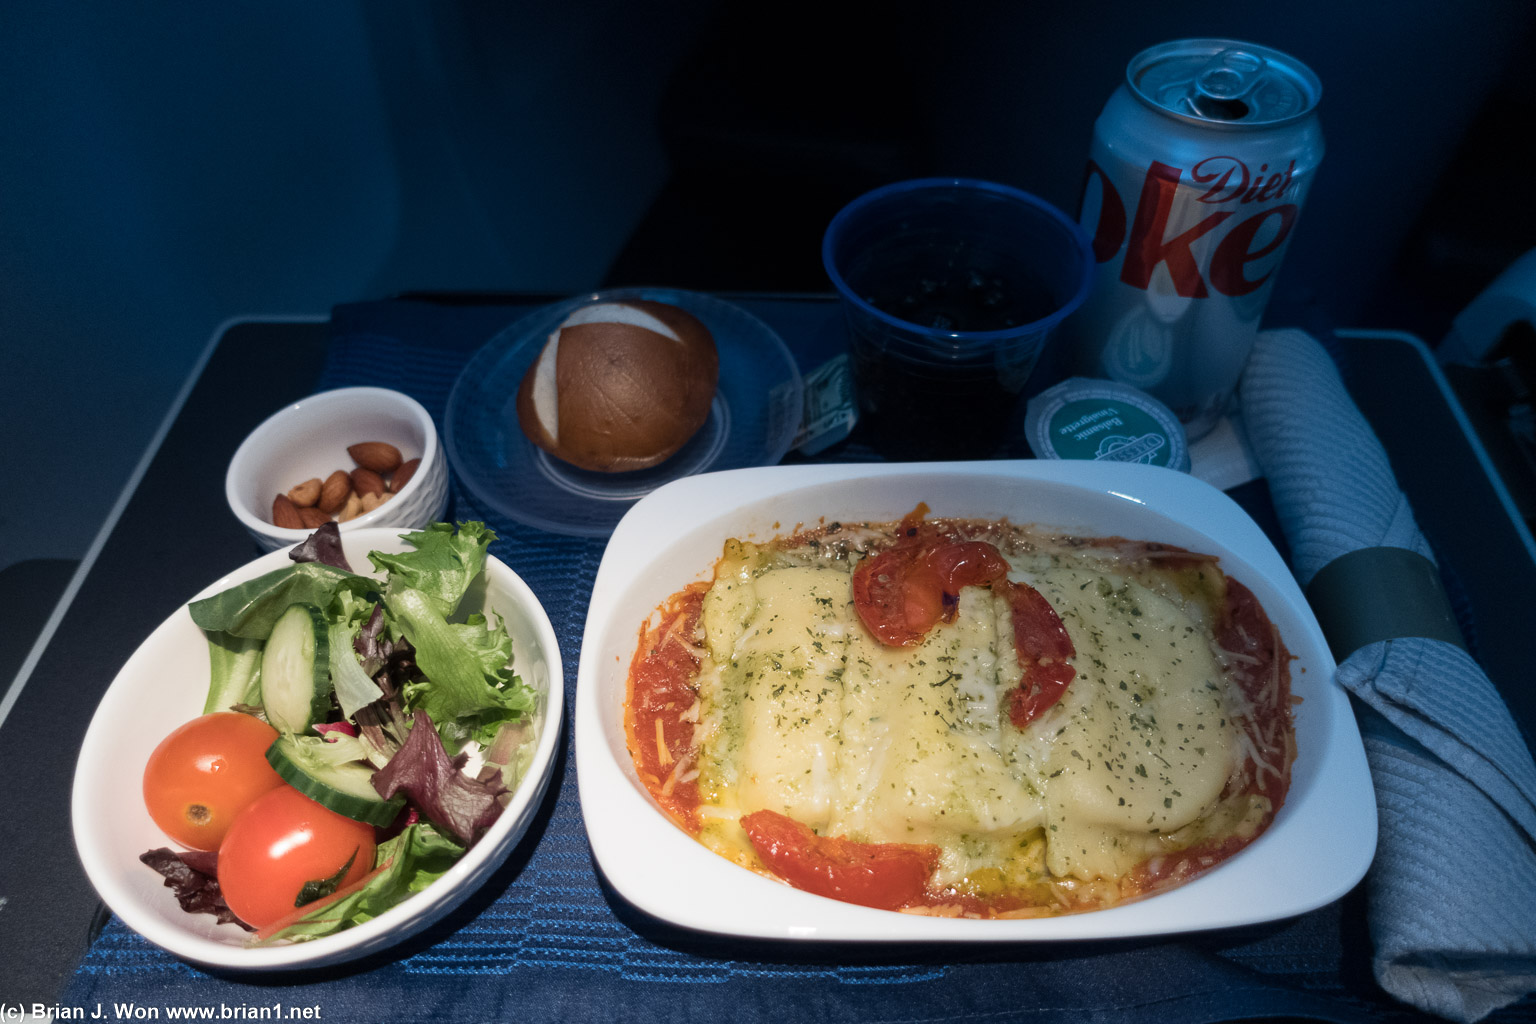 Substantial ravioli on EWR-LAX in domestic first class.